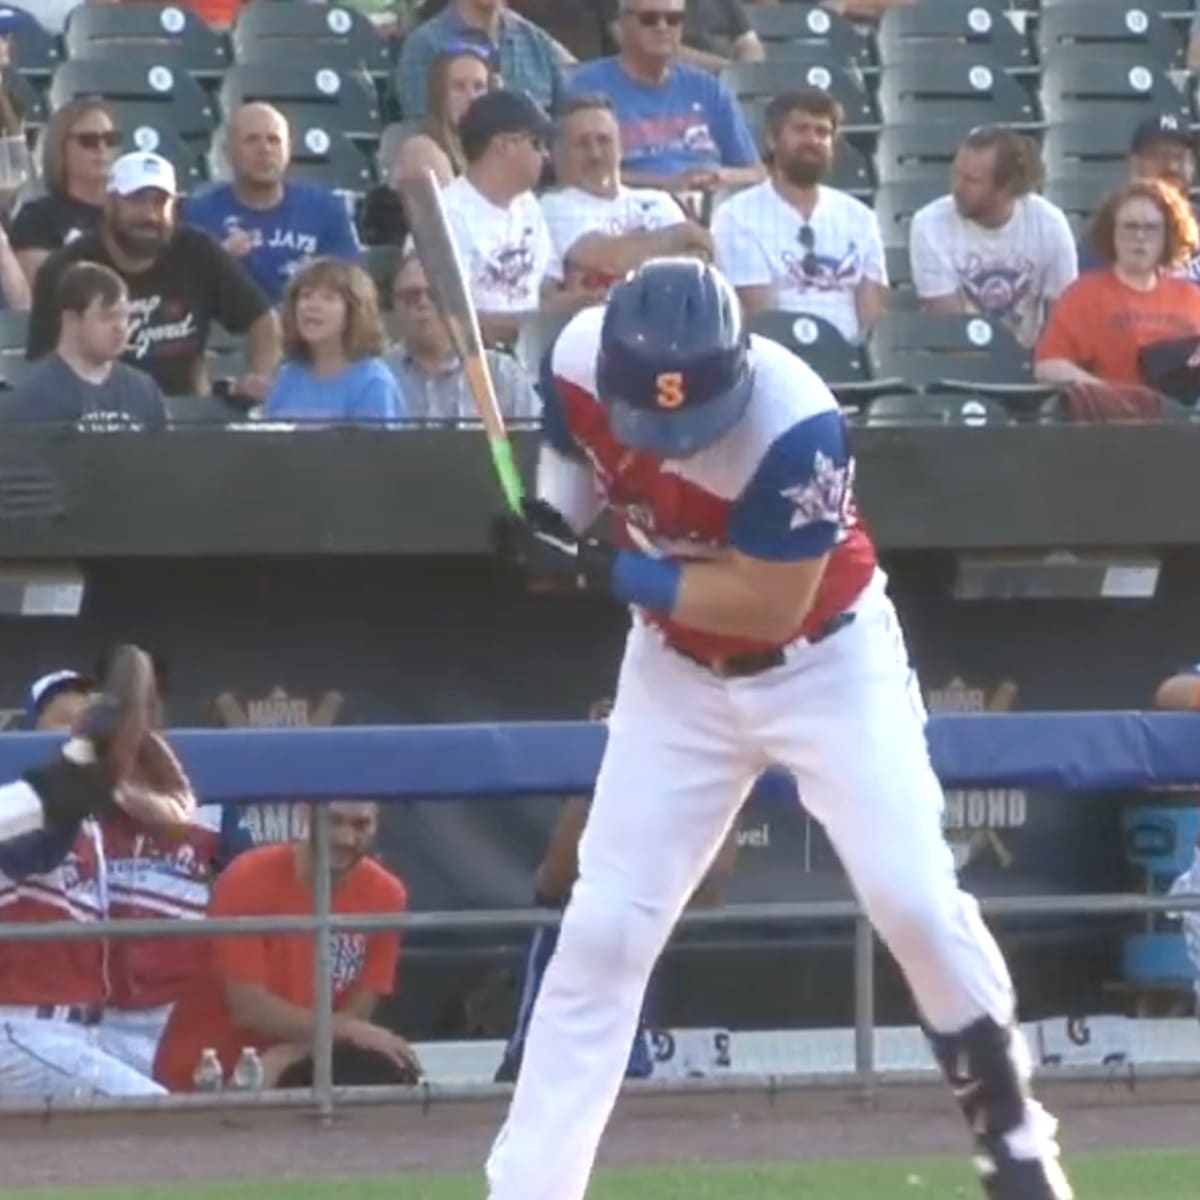 Syracuse Mets' Luke Voit catches pitch that hit him (video